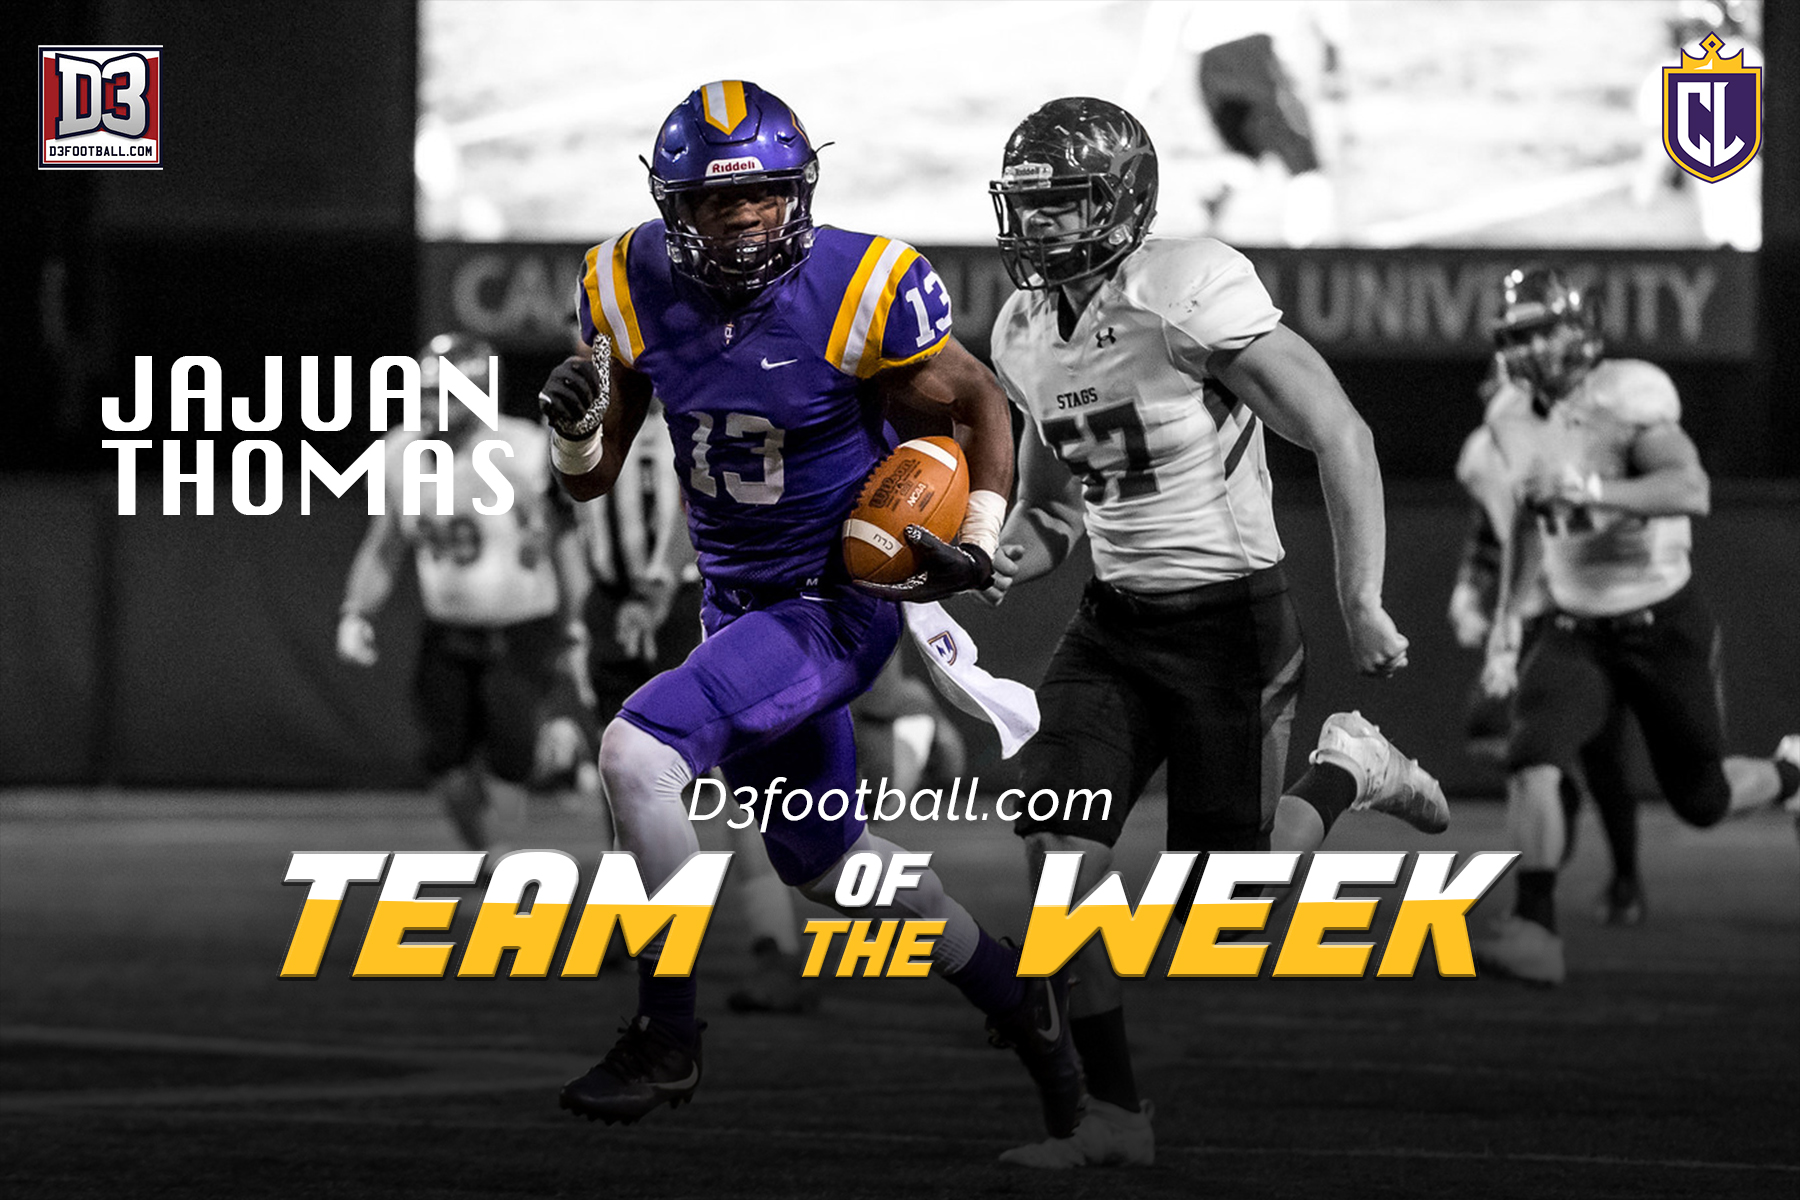 Thomas Named D3football.com Team of the Week Wide Receiver